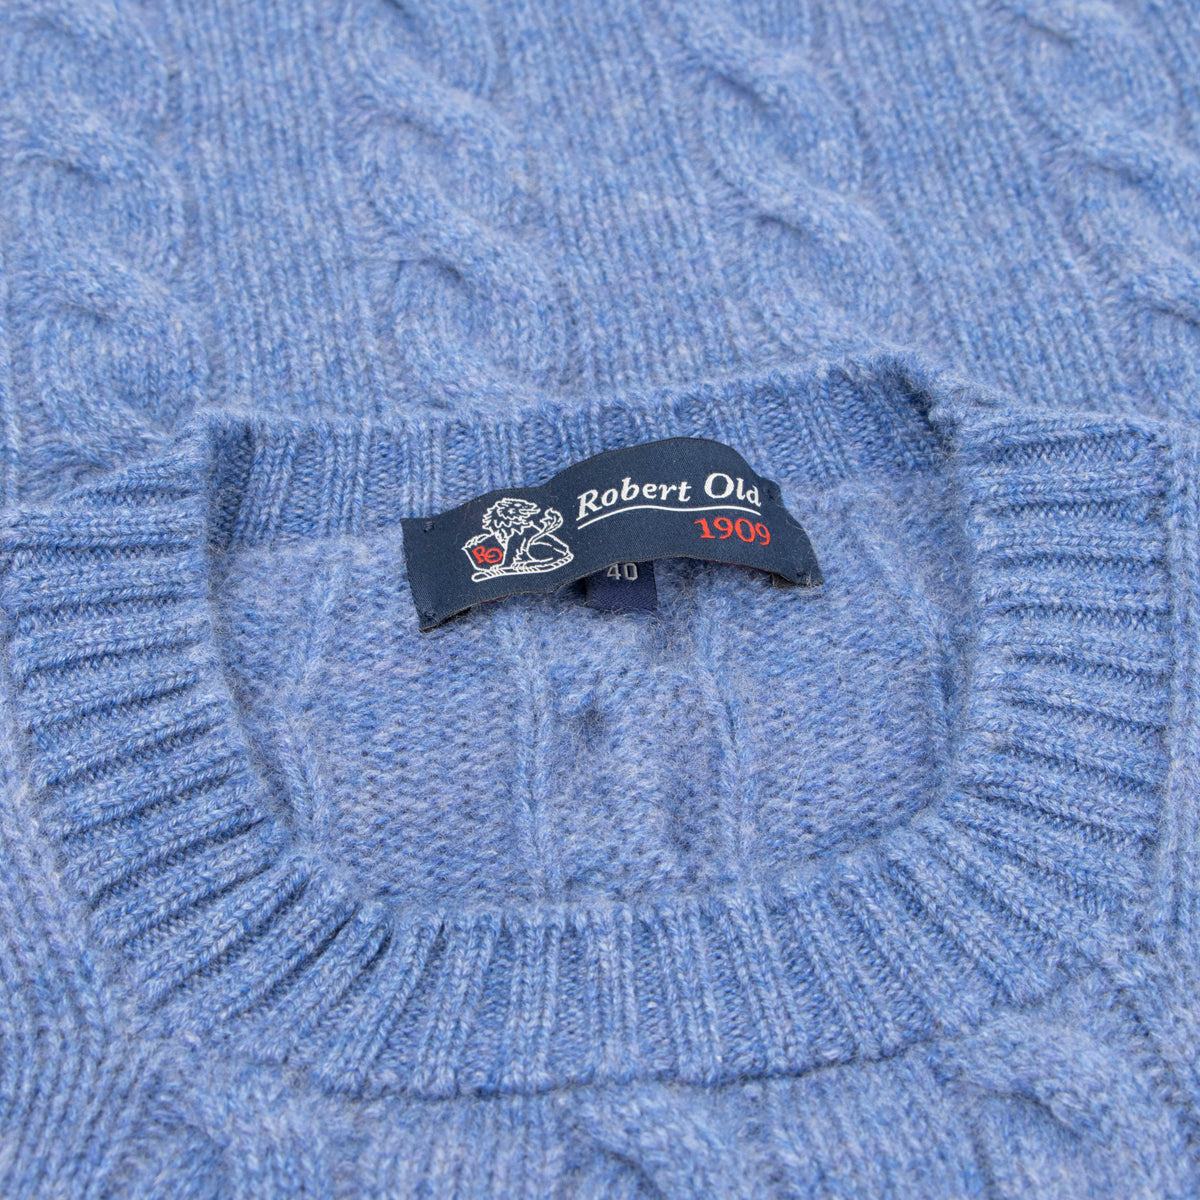 Lapis Blue Rothesay 4ply Cable Crew Cashmere Sweater  Robert Old   